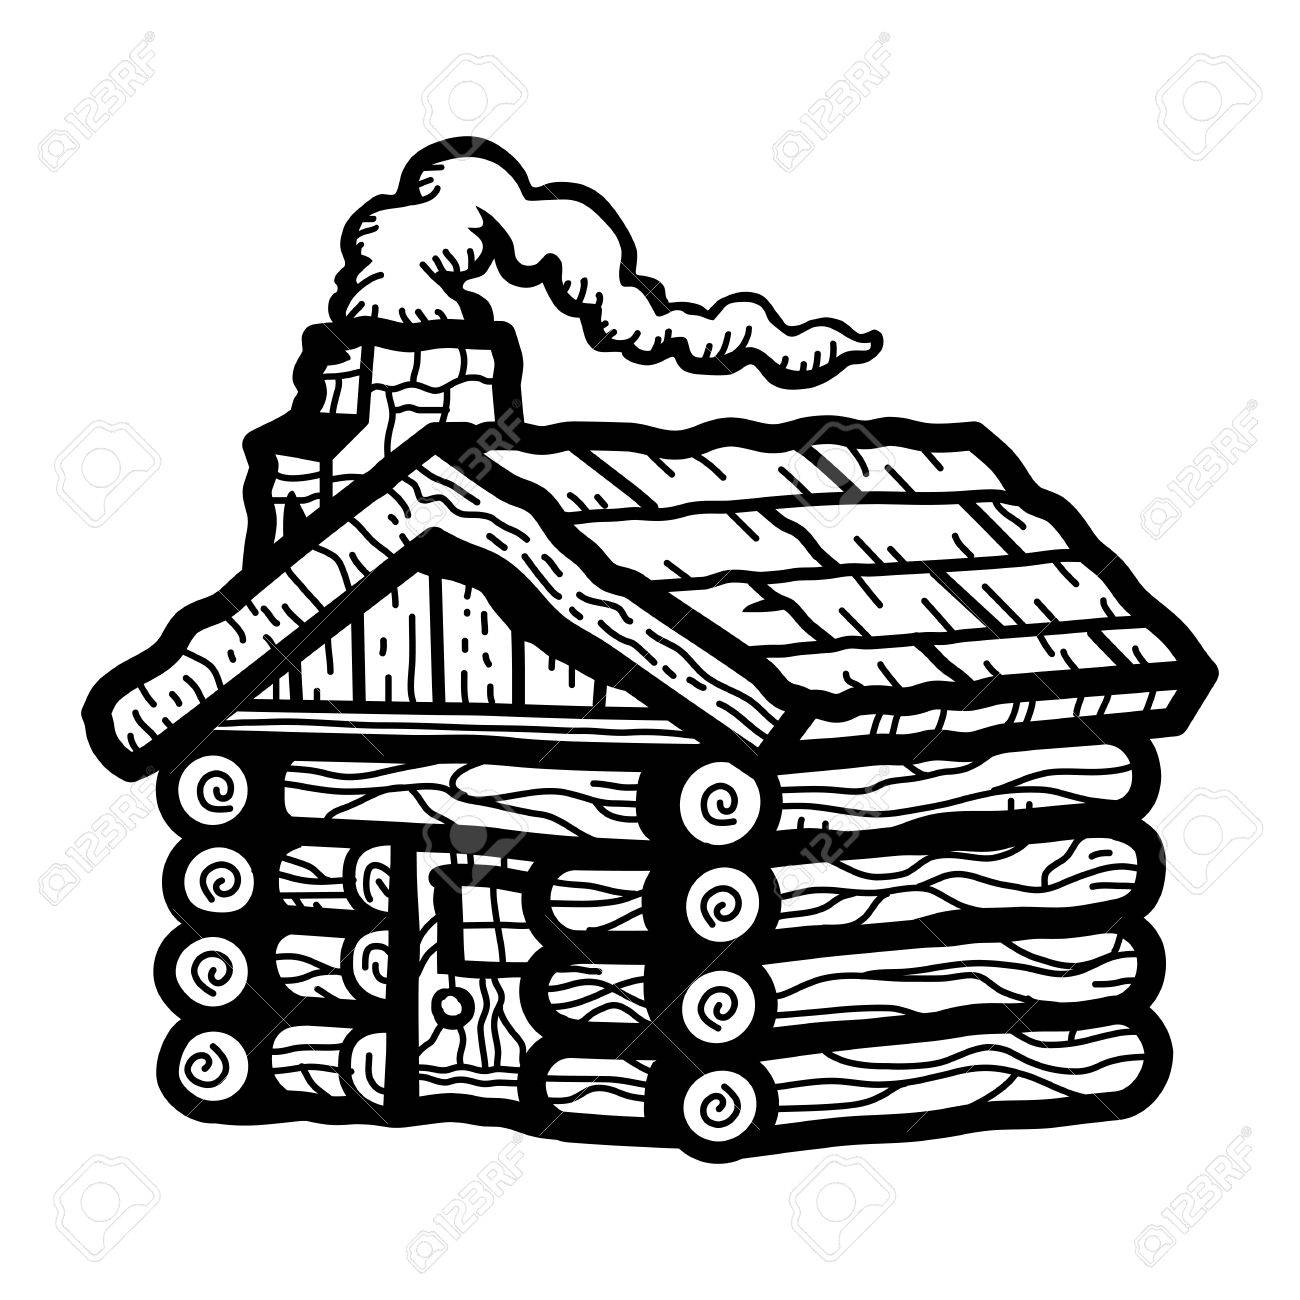 cabin clipart black and white